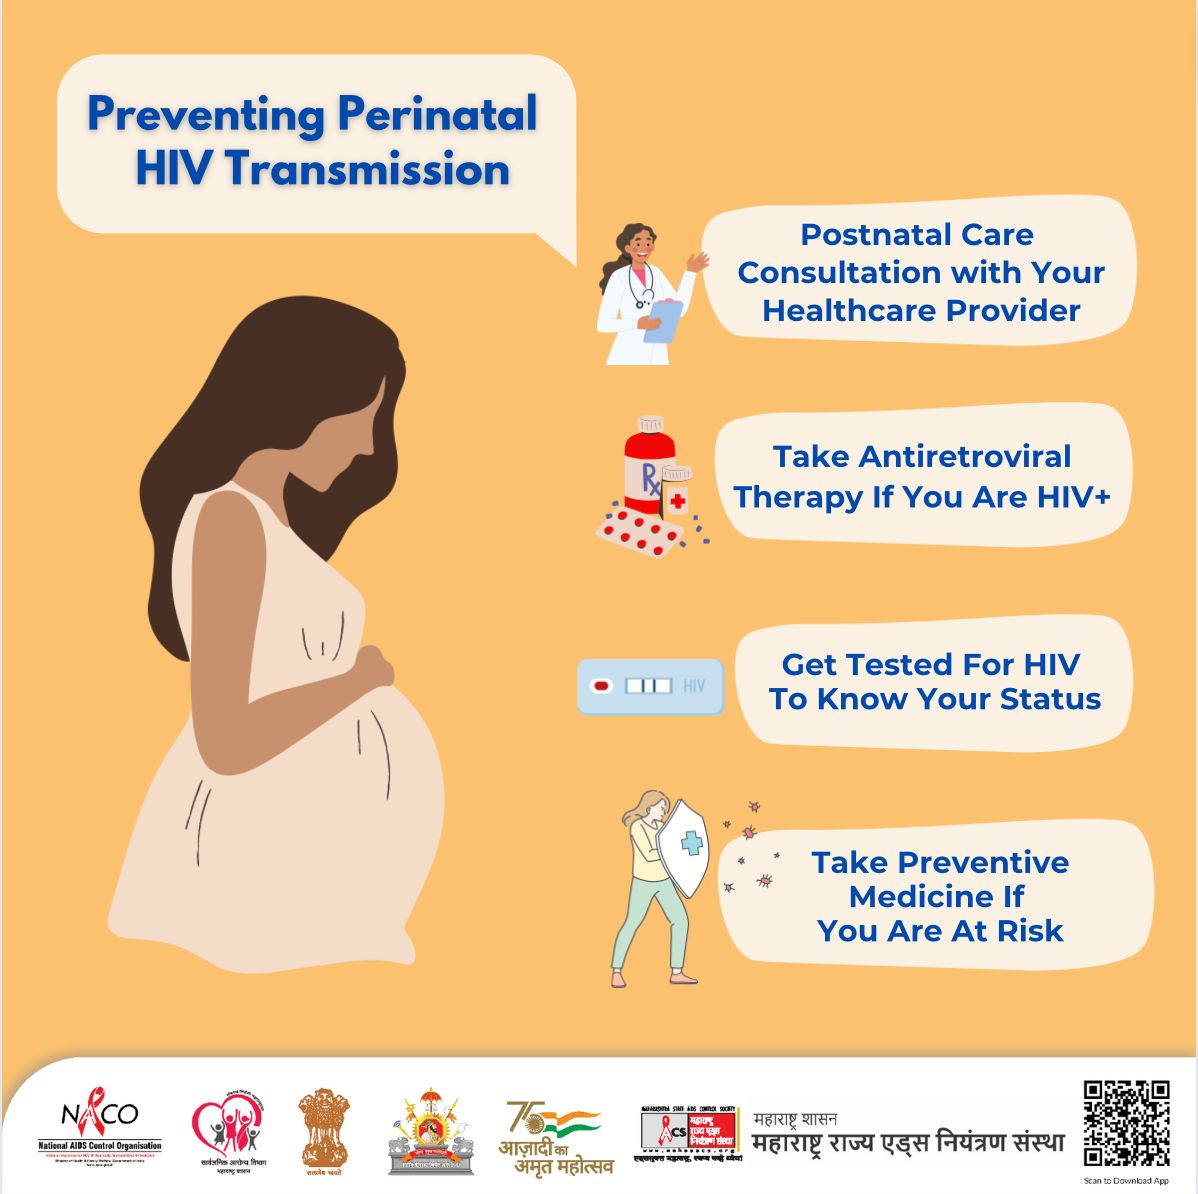 HIV testing before planning pregnancy is a vital step in protecting both mother and child from transmission risks

#NACOINDIA 
#Call1097 
#KnowYourStatus
#PrenatalTesting
#PreventHIVTransmission
#HealthyPregnancy
#SafeMotherhood
#hivawarenessandprevention